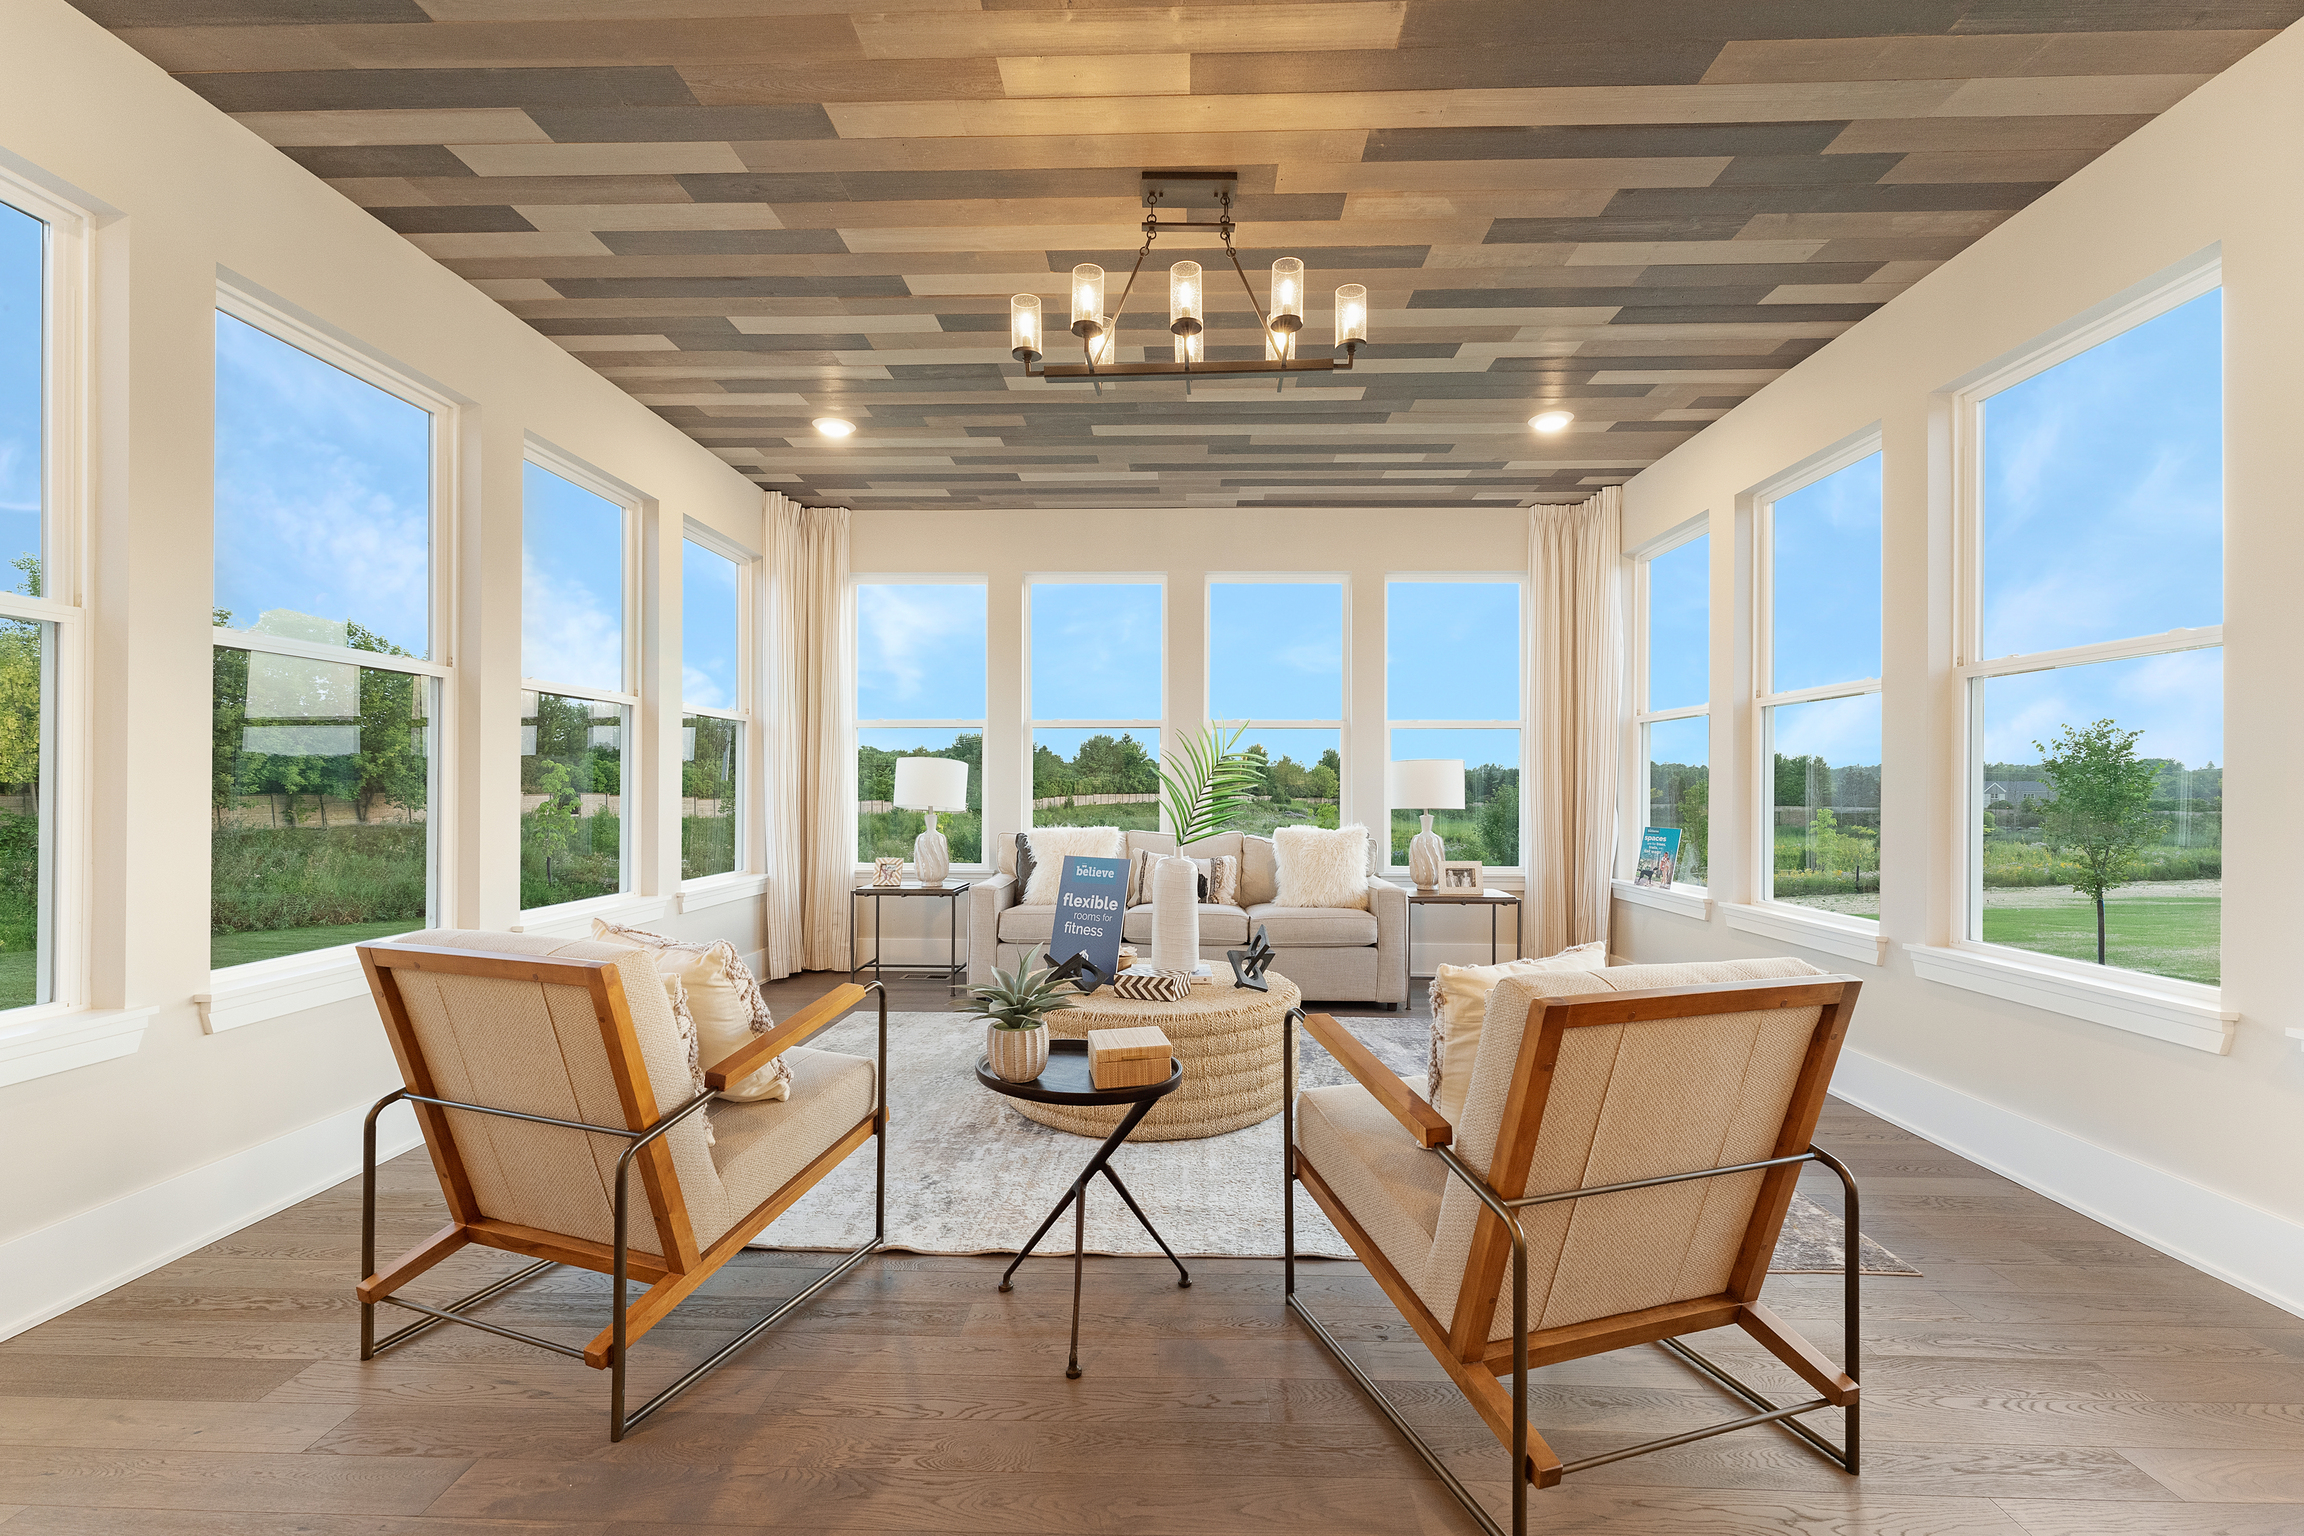 Neutral-Colored Morning Room With Rattan Accent Chairs and Statement Ceiling